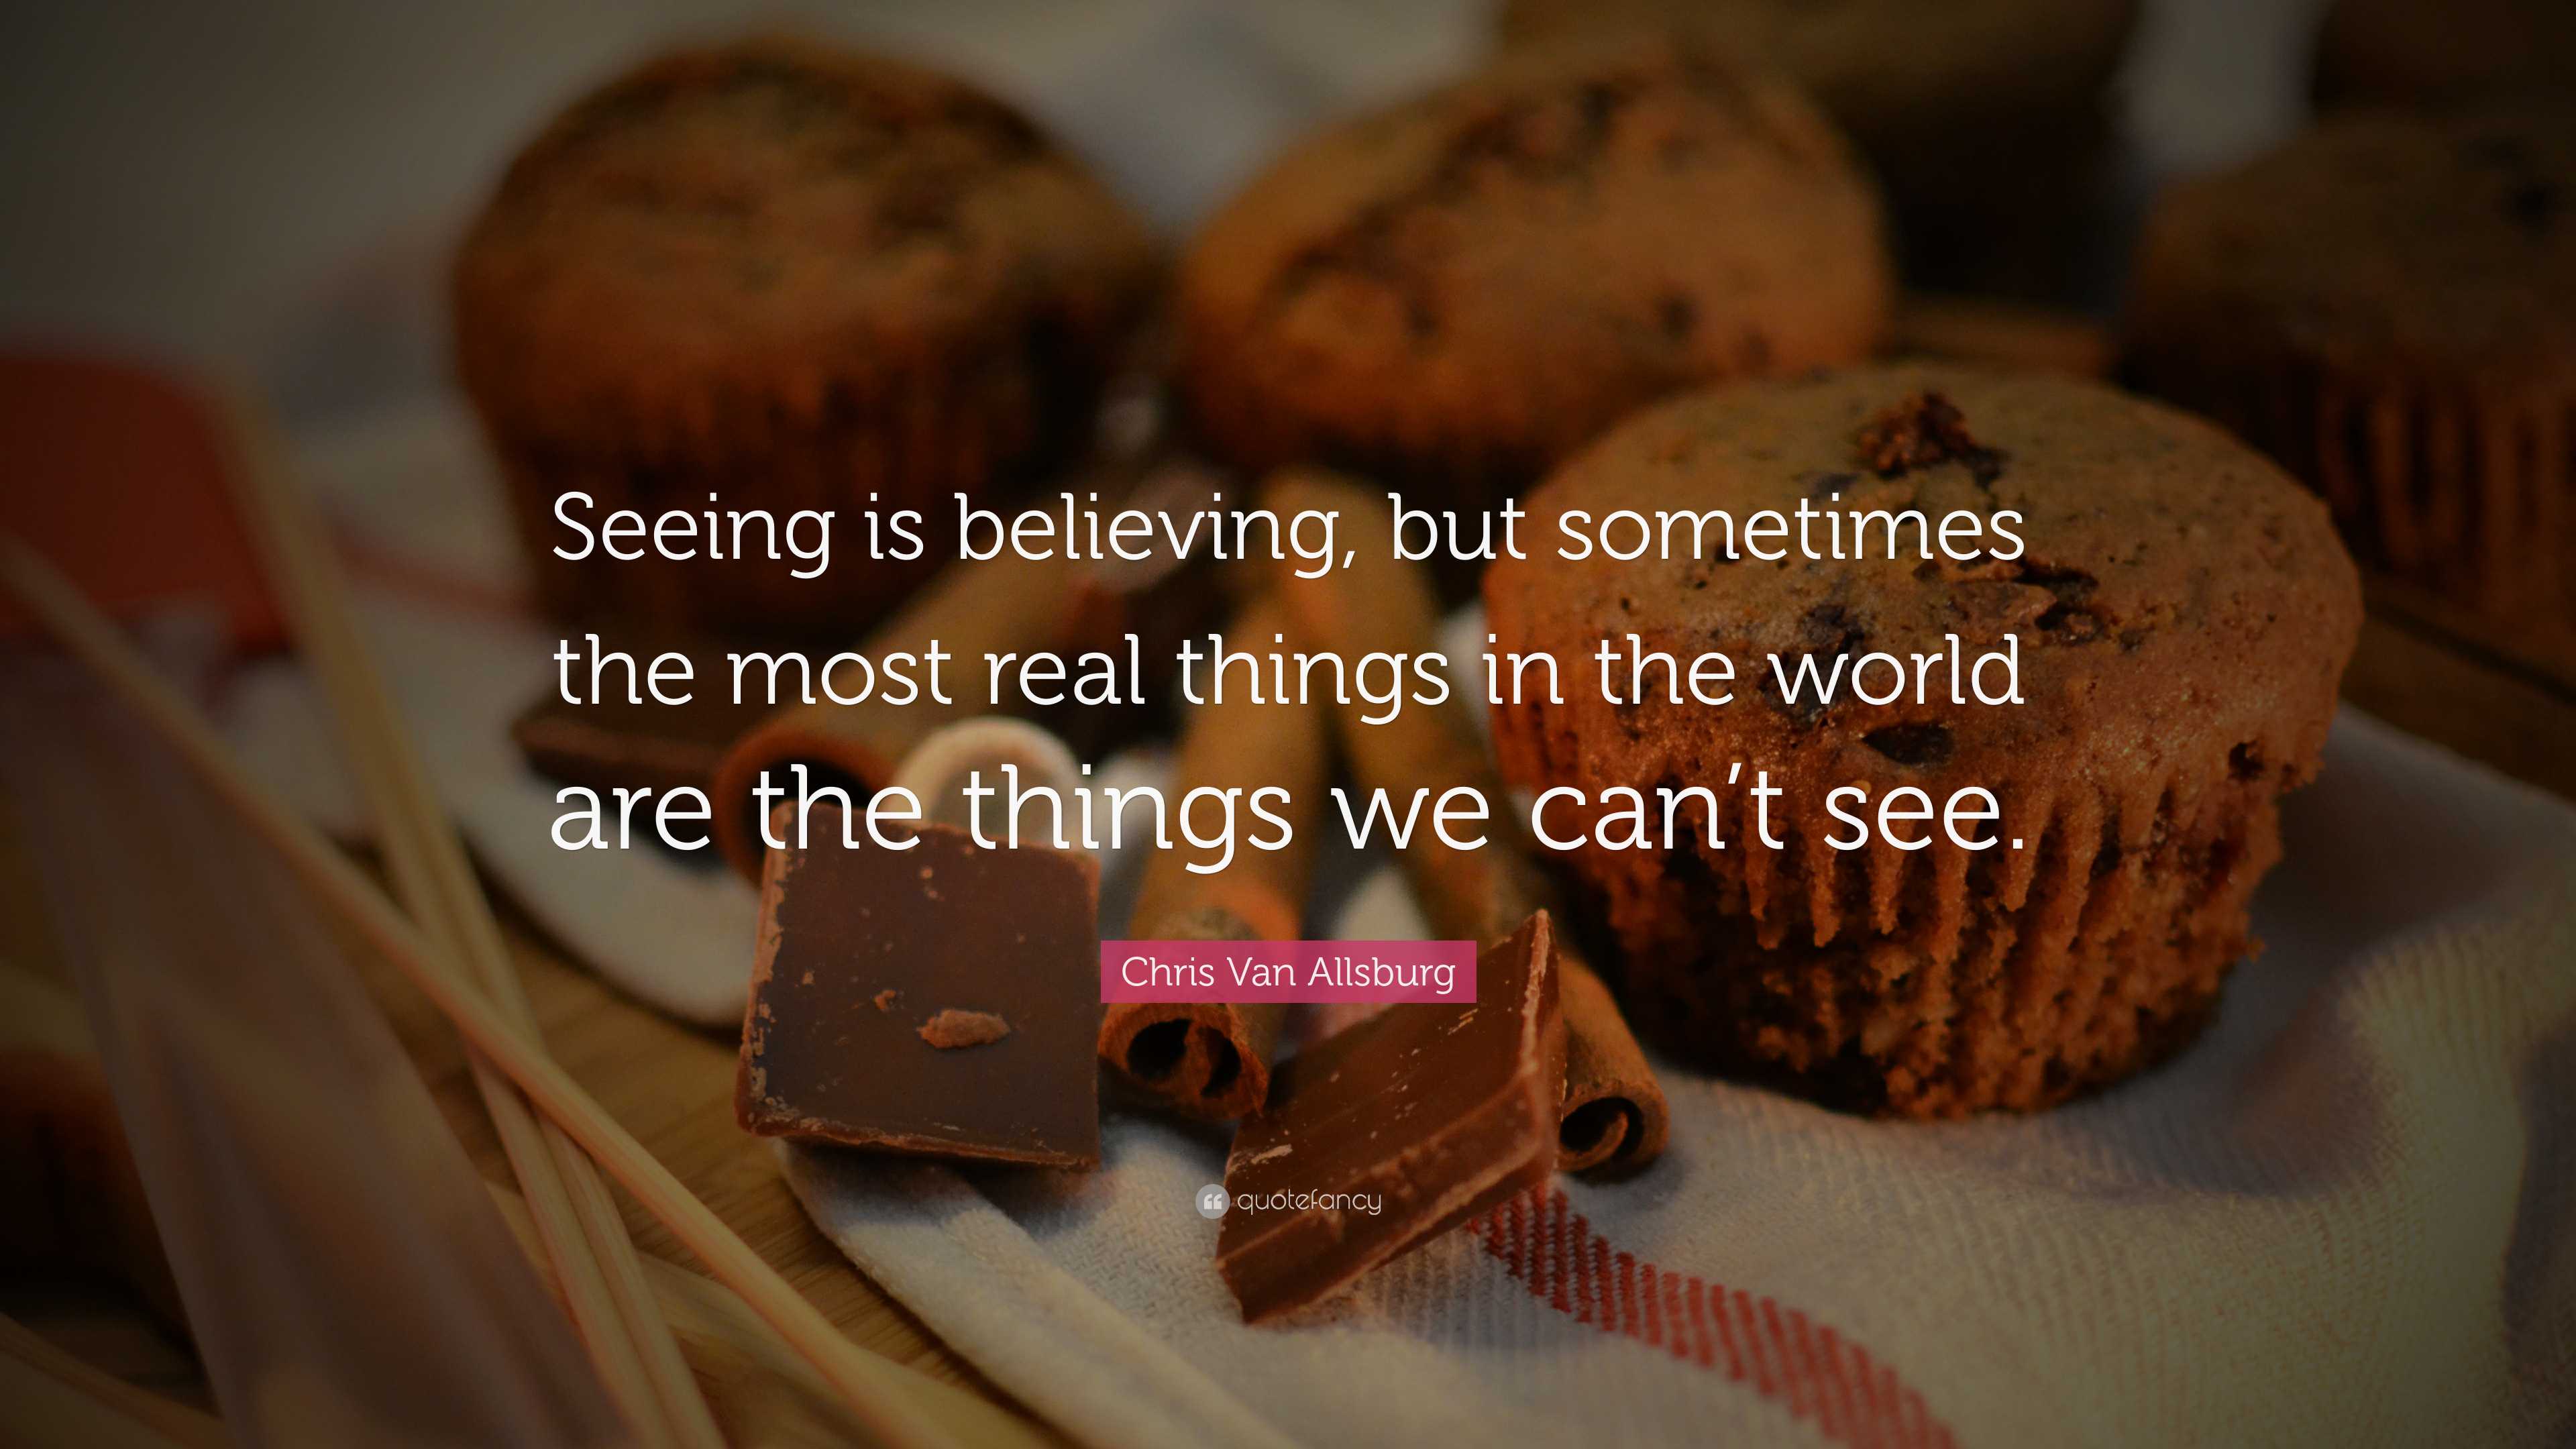 Chris Van Allsburg Quote: “Seeing is believing, but sometimes the most ...